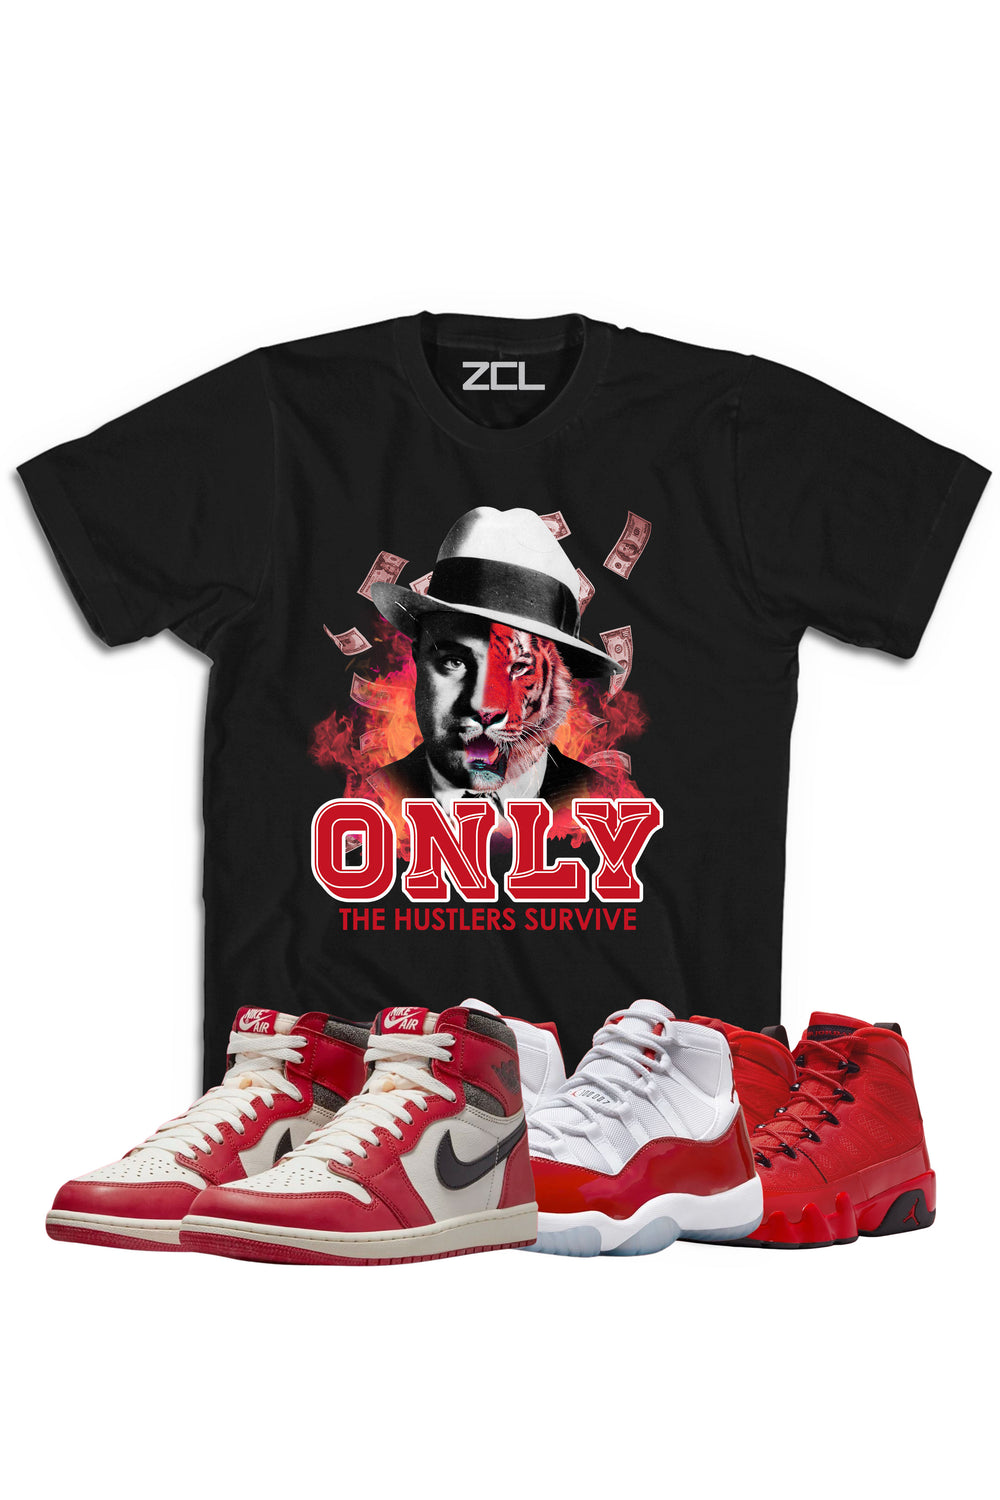 Air Jordan "Only Hustlers Survive" Tee Lost & Found - Cherry Red - Zamage